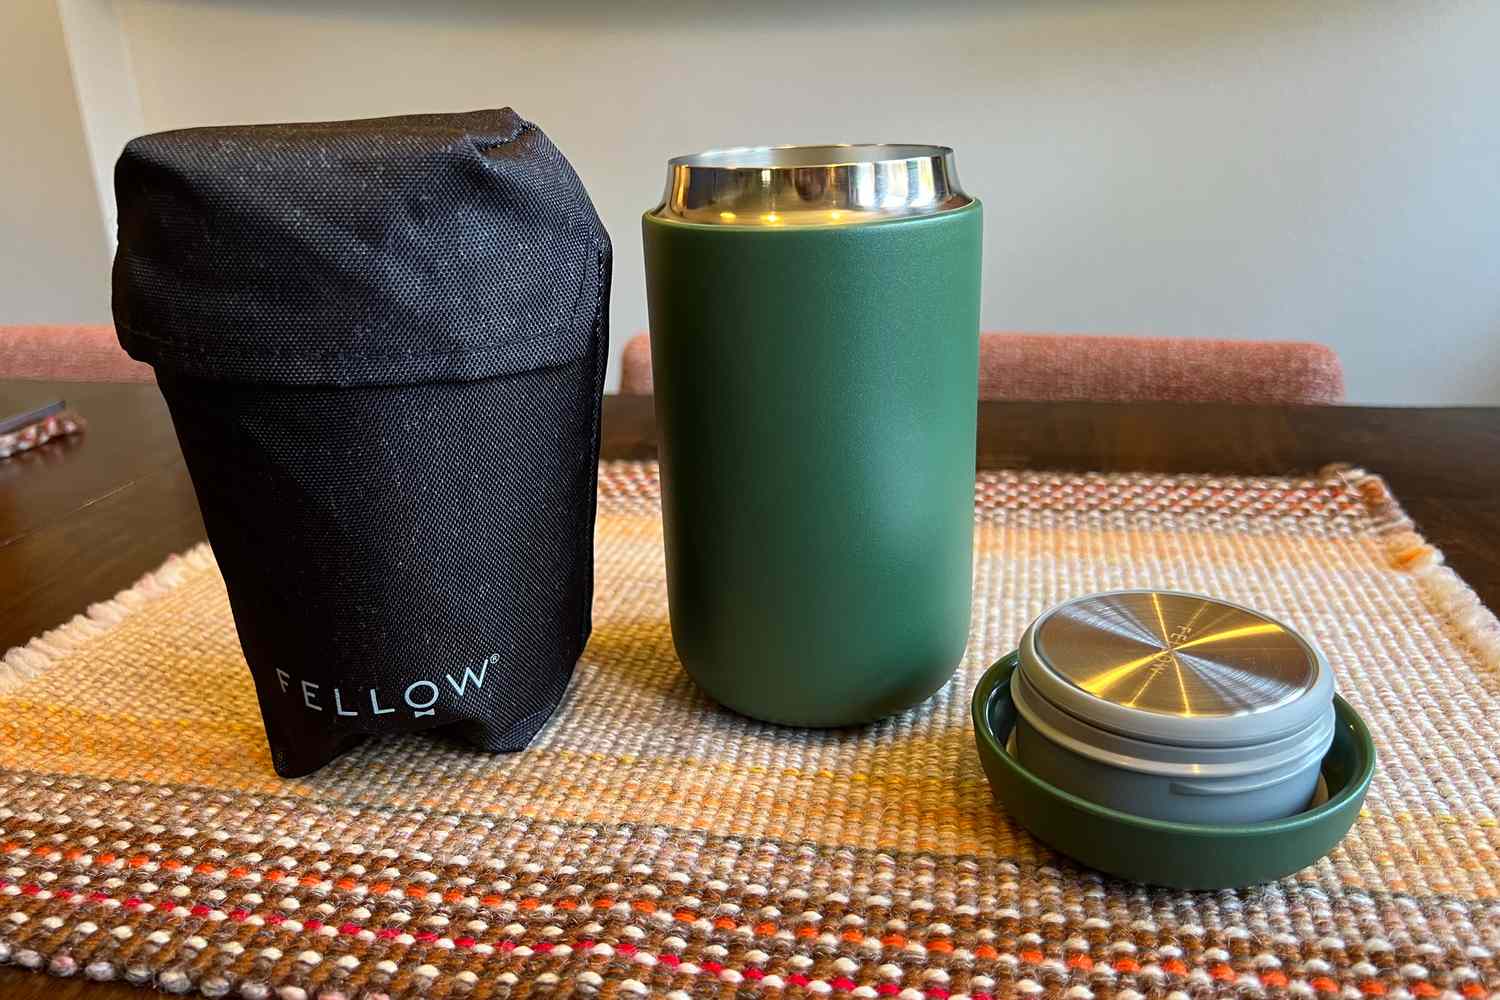 The Best Coffee Thermos